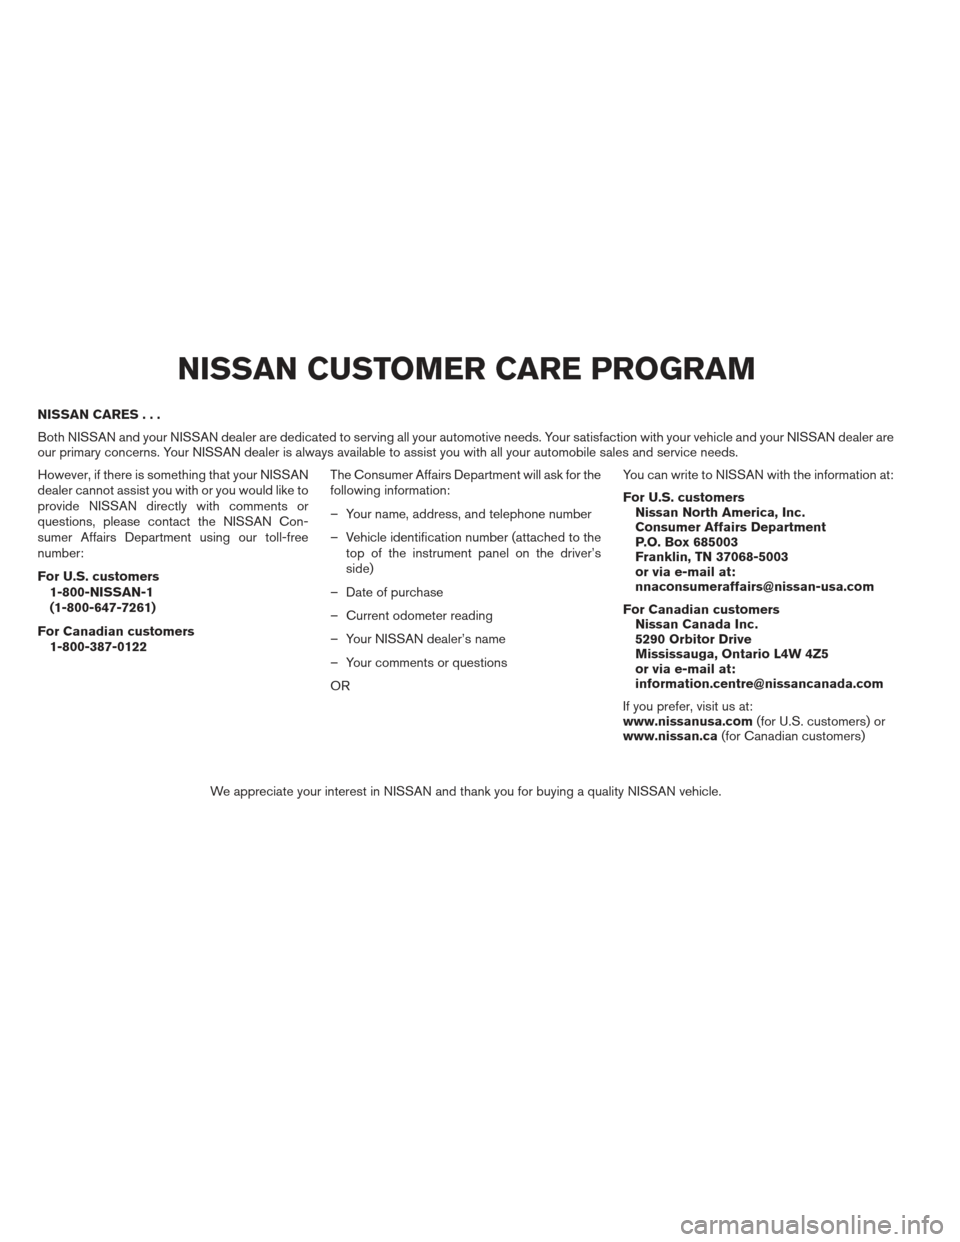 NISSAN MAXIMA 2013 A35 / 7.G Owners Manual NISSAN CARES...
Both NISSAN and your NISSAN dealer are dedicated to serving all your automotive needs. Your satisfaction with your vehicle and your NISSAN dealer are
our primary concerns. Your NISSAN 